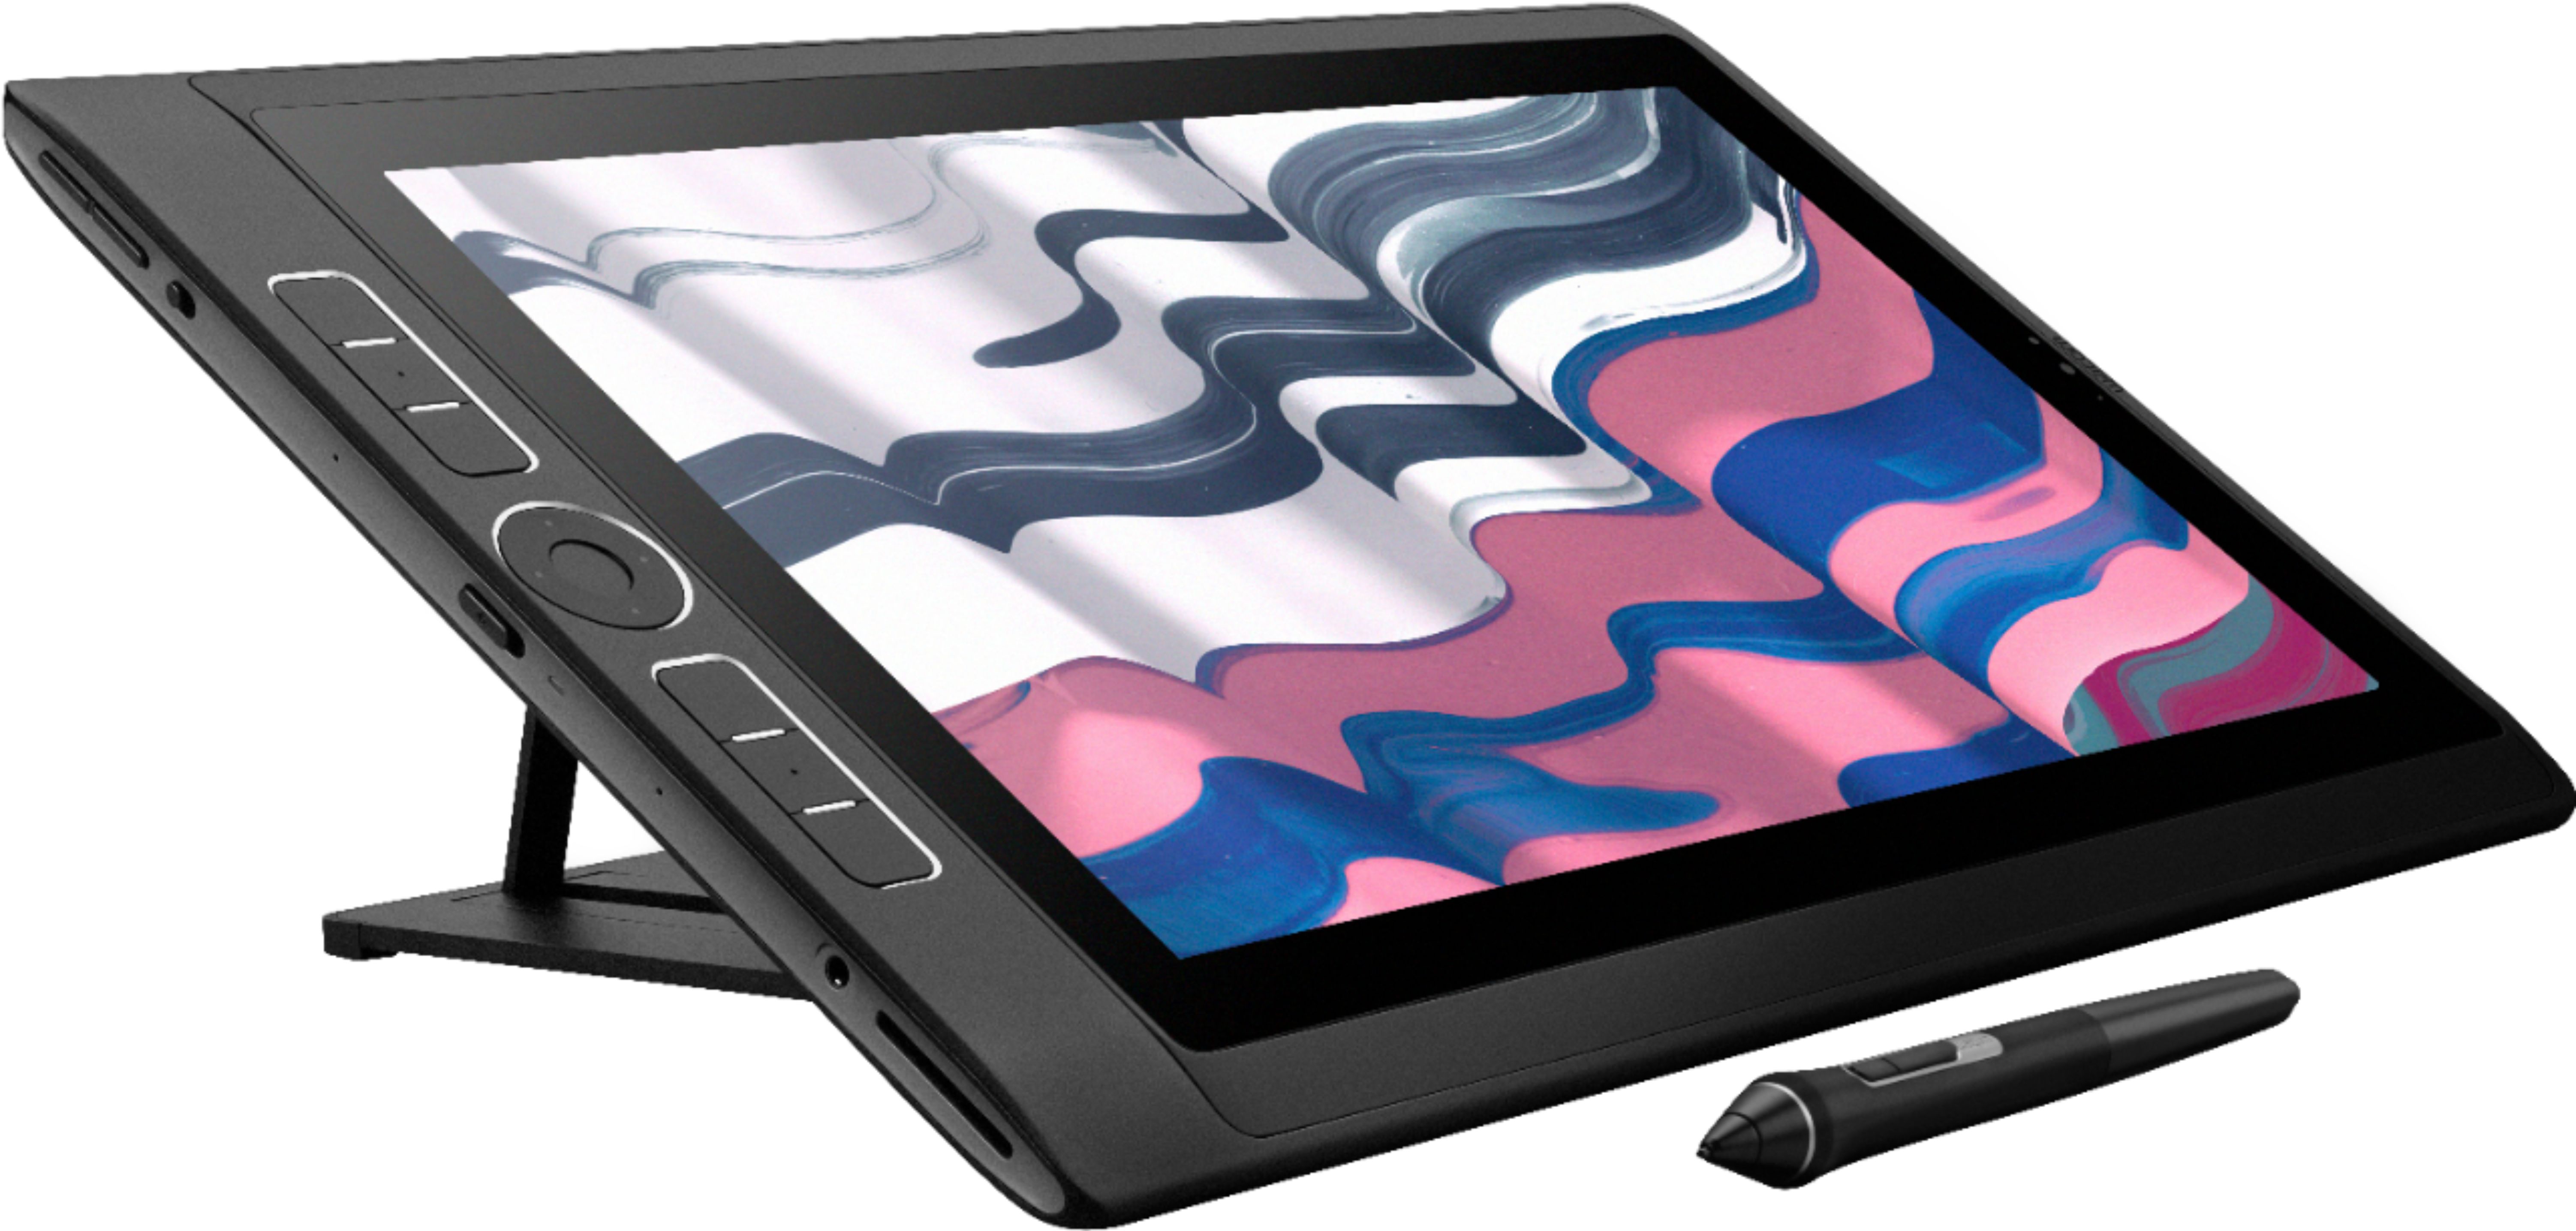 wacom tablet with zbrush core